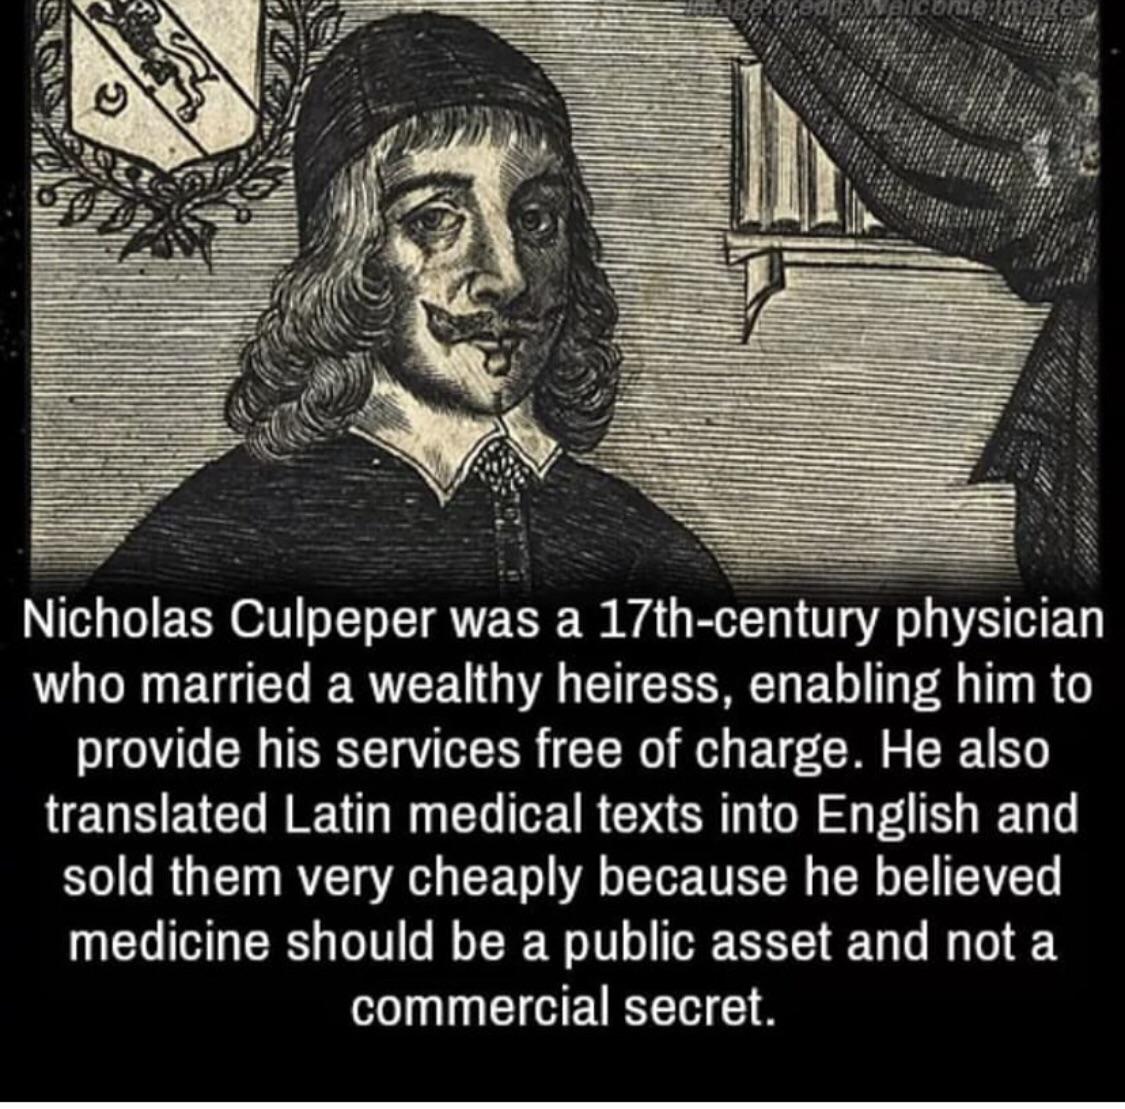 Nicholas Culpeper continues to be an example to us all.